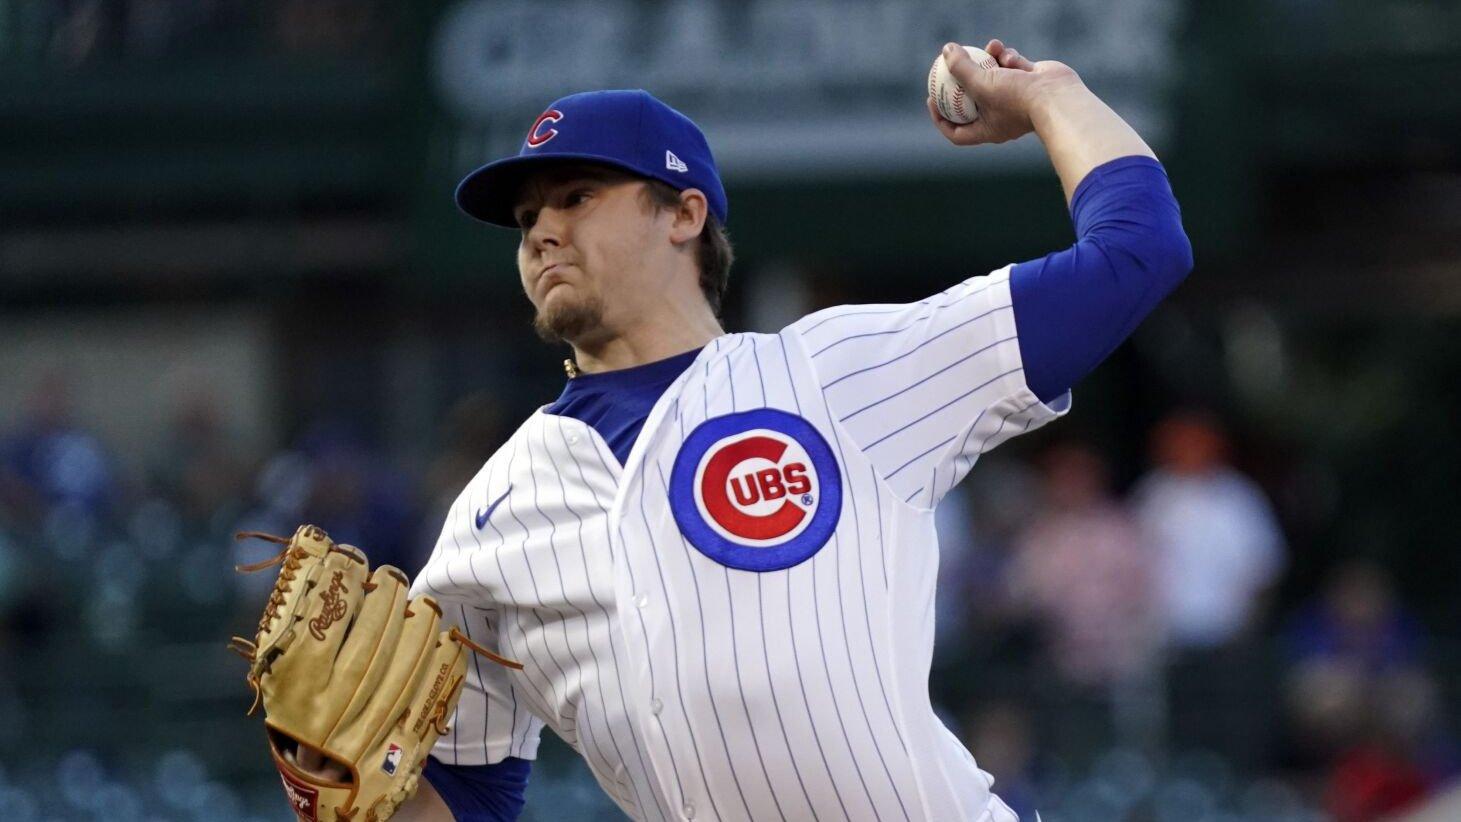 Cubs vs Rangers MLB Opening Day Prediction, Odds & Best Bets (3/28): Steele Steals the Show